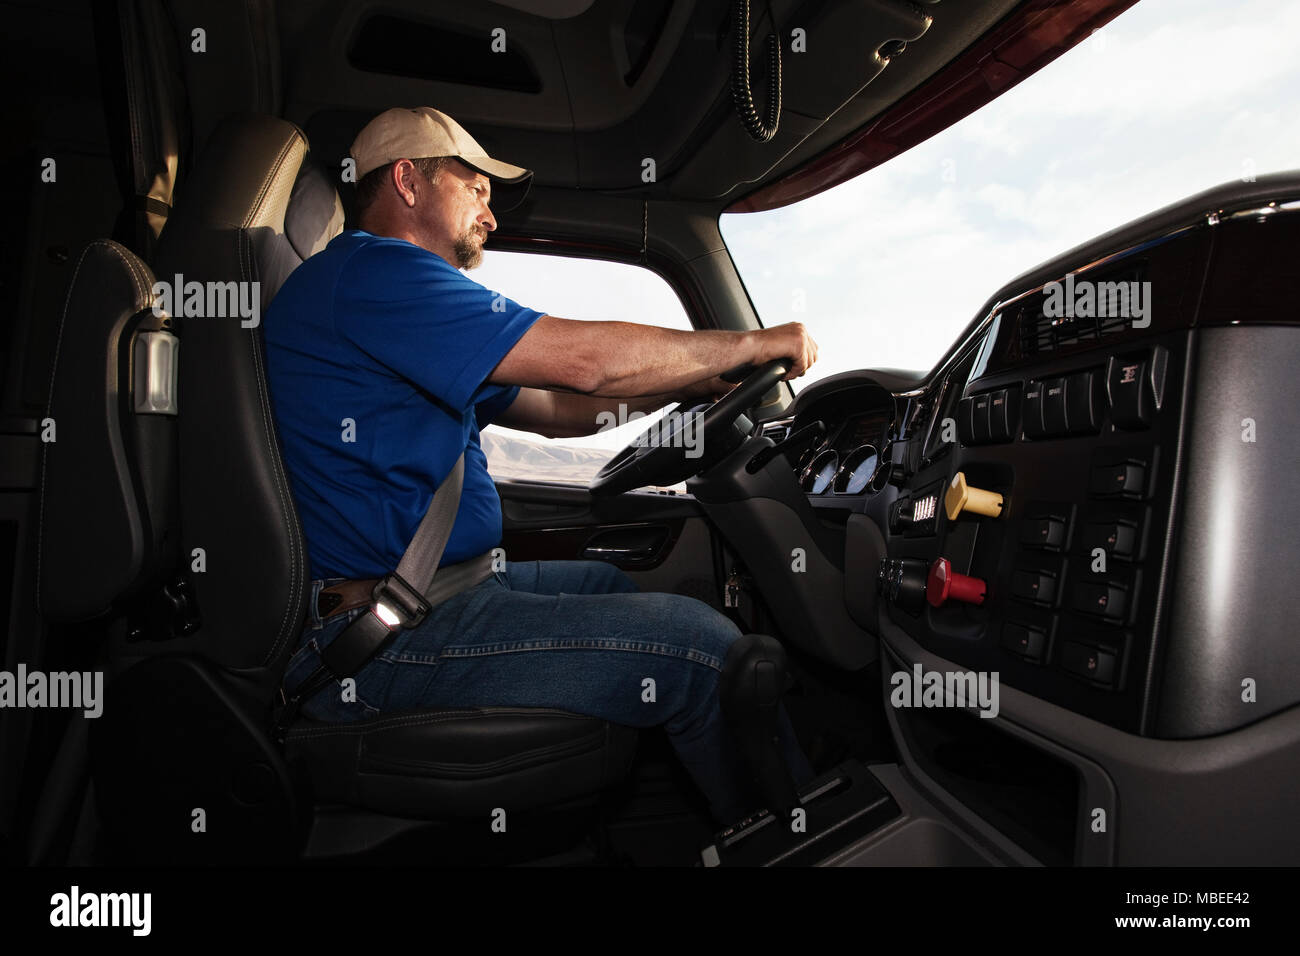 Caucasian man driver in the cab of a  commercial truck. Stock Photo